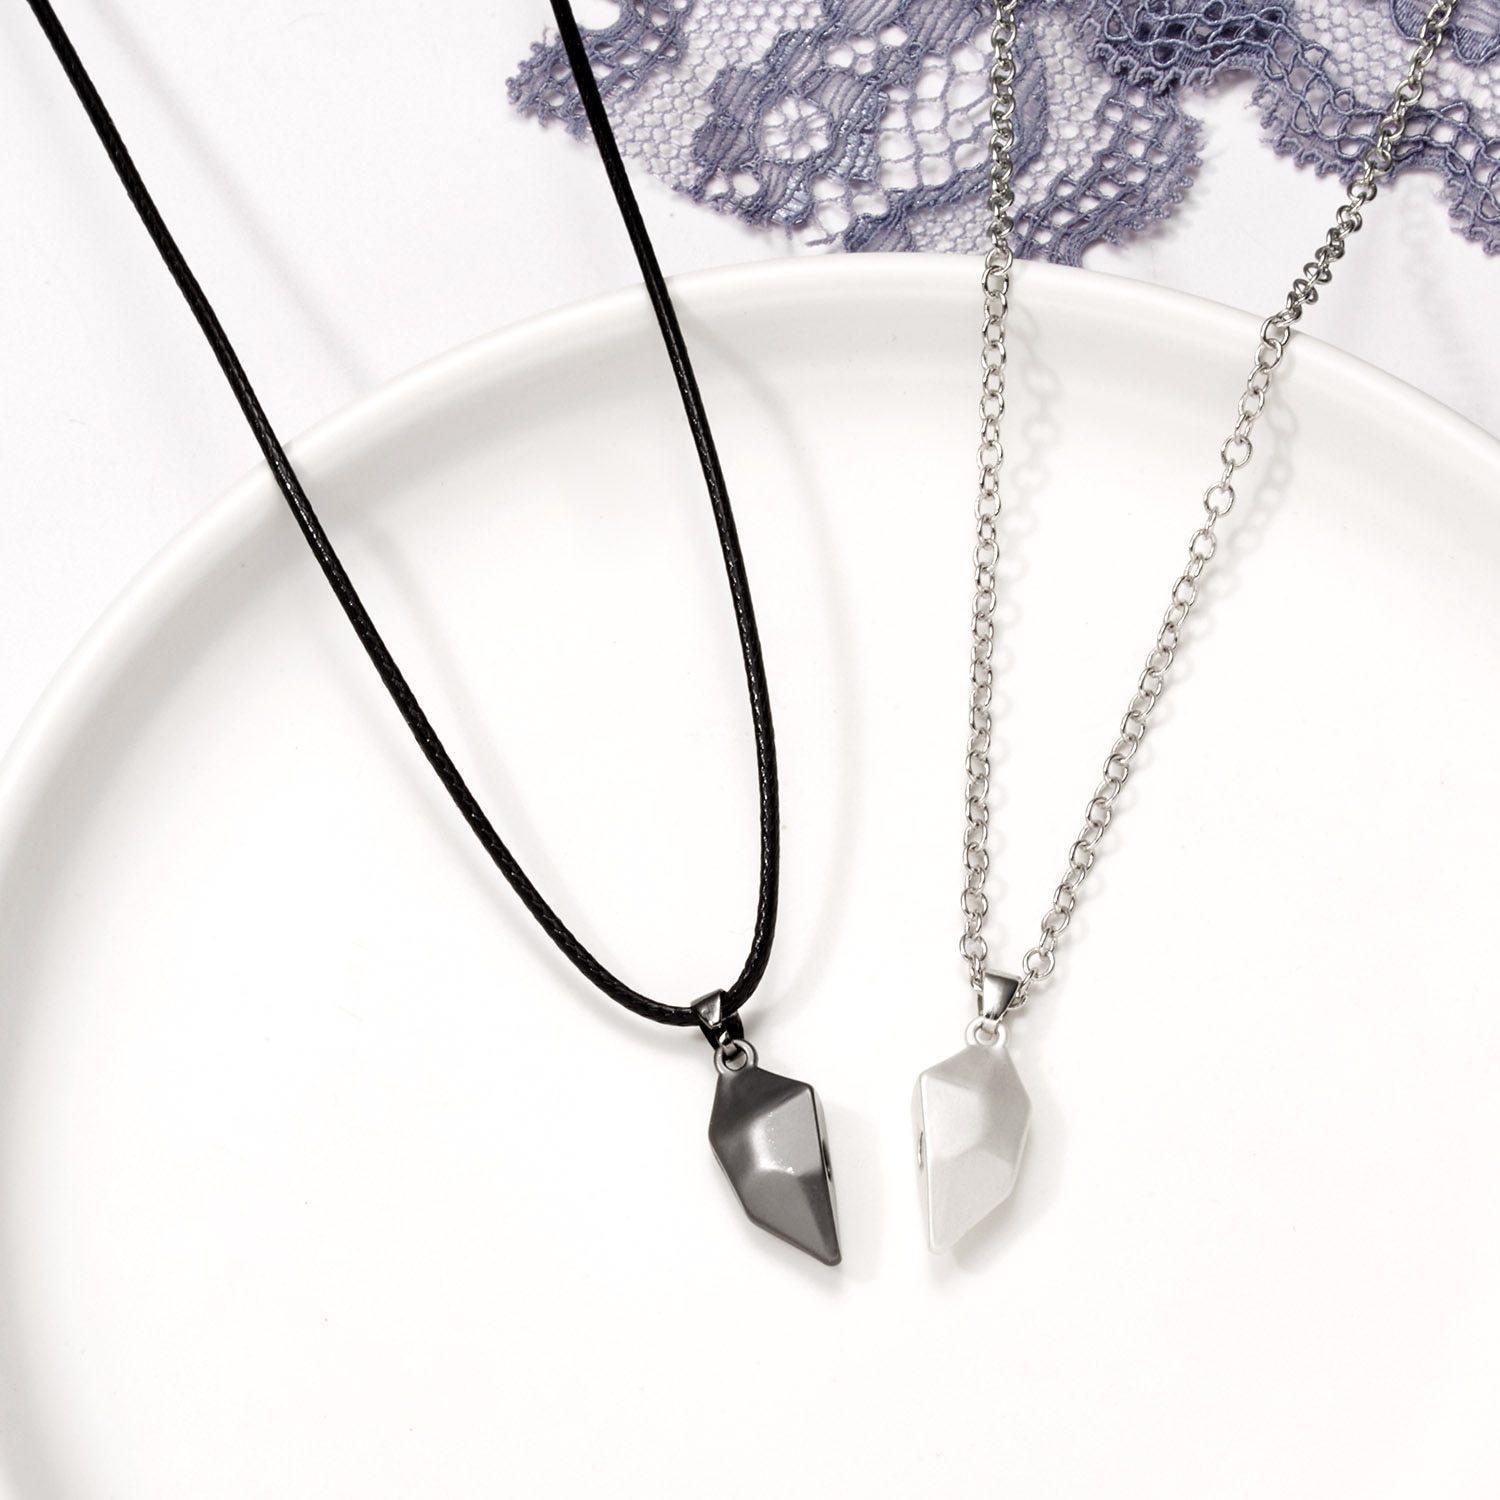 Magnetic Bff Matching Necklaces Gift Set For 2 in 2023 | Magnetic Bff Matching Necklaces Gift Set For 2 - undefined | best friend necklace for 2, best friend necklaces magnetic, Friendship Pendant Necklaces, gift ideas for Best Friends, Magnetic Friendship necklace, Magnetic heart Necklace, To My Best Friend Friendship Gift Necklace Set | From Hunny Life | hunnylife.com